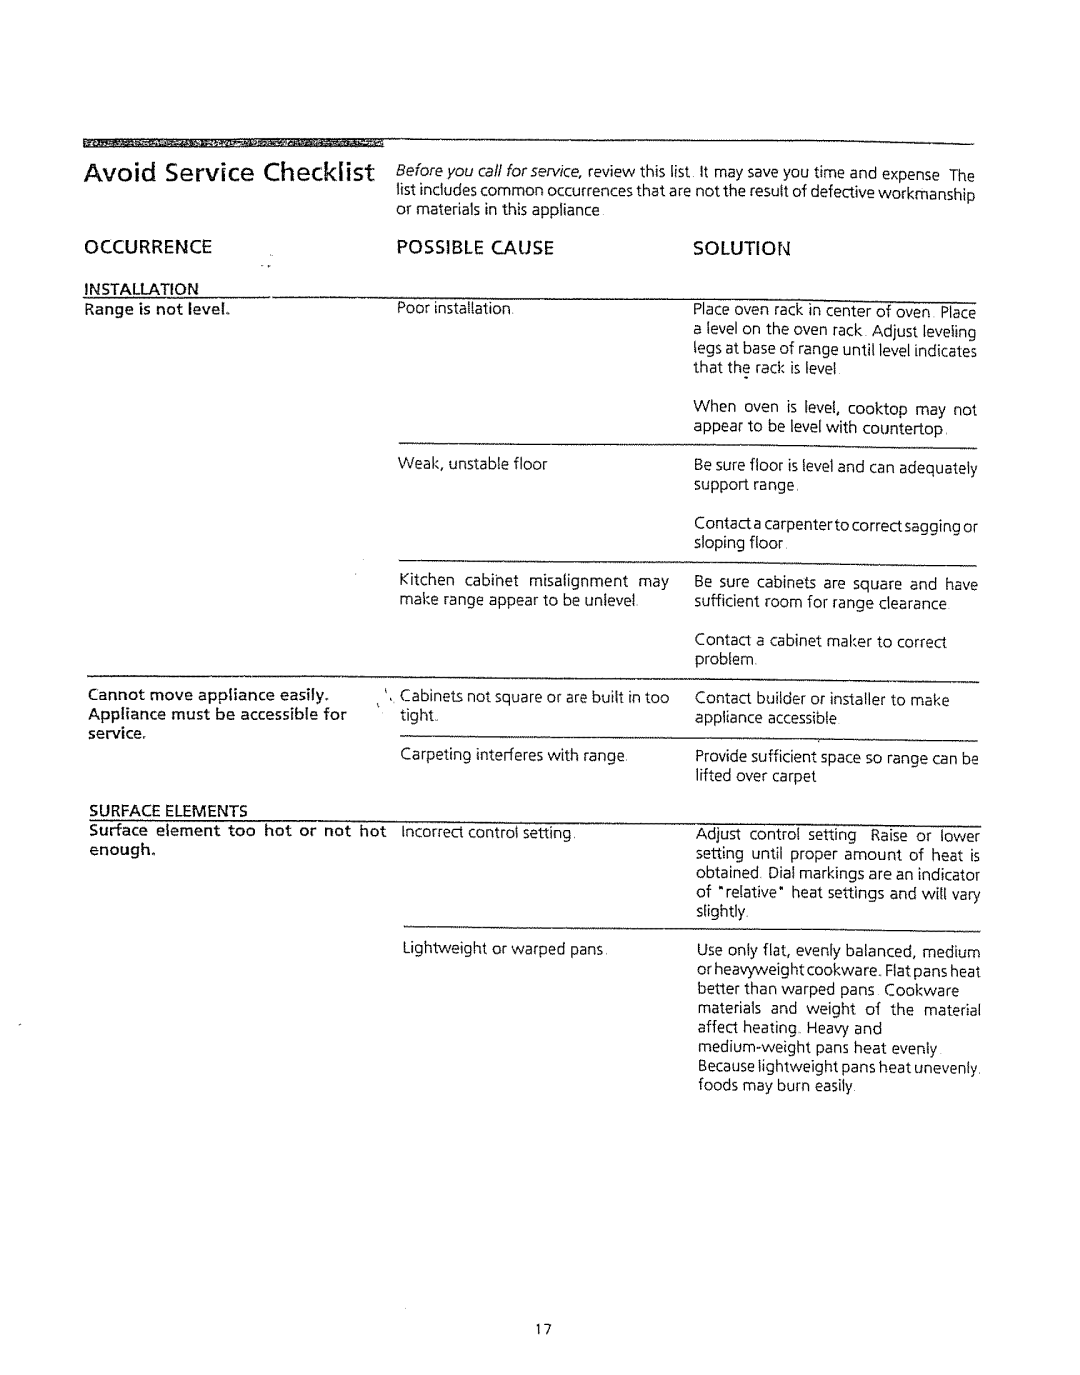 Kenmore 5303304549 manual Avoid Service Checklist, Occurrence, Possible Cause, Solution 